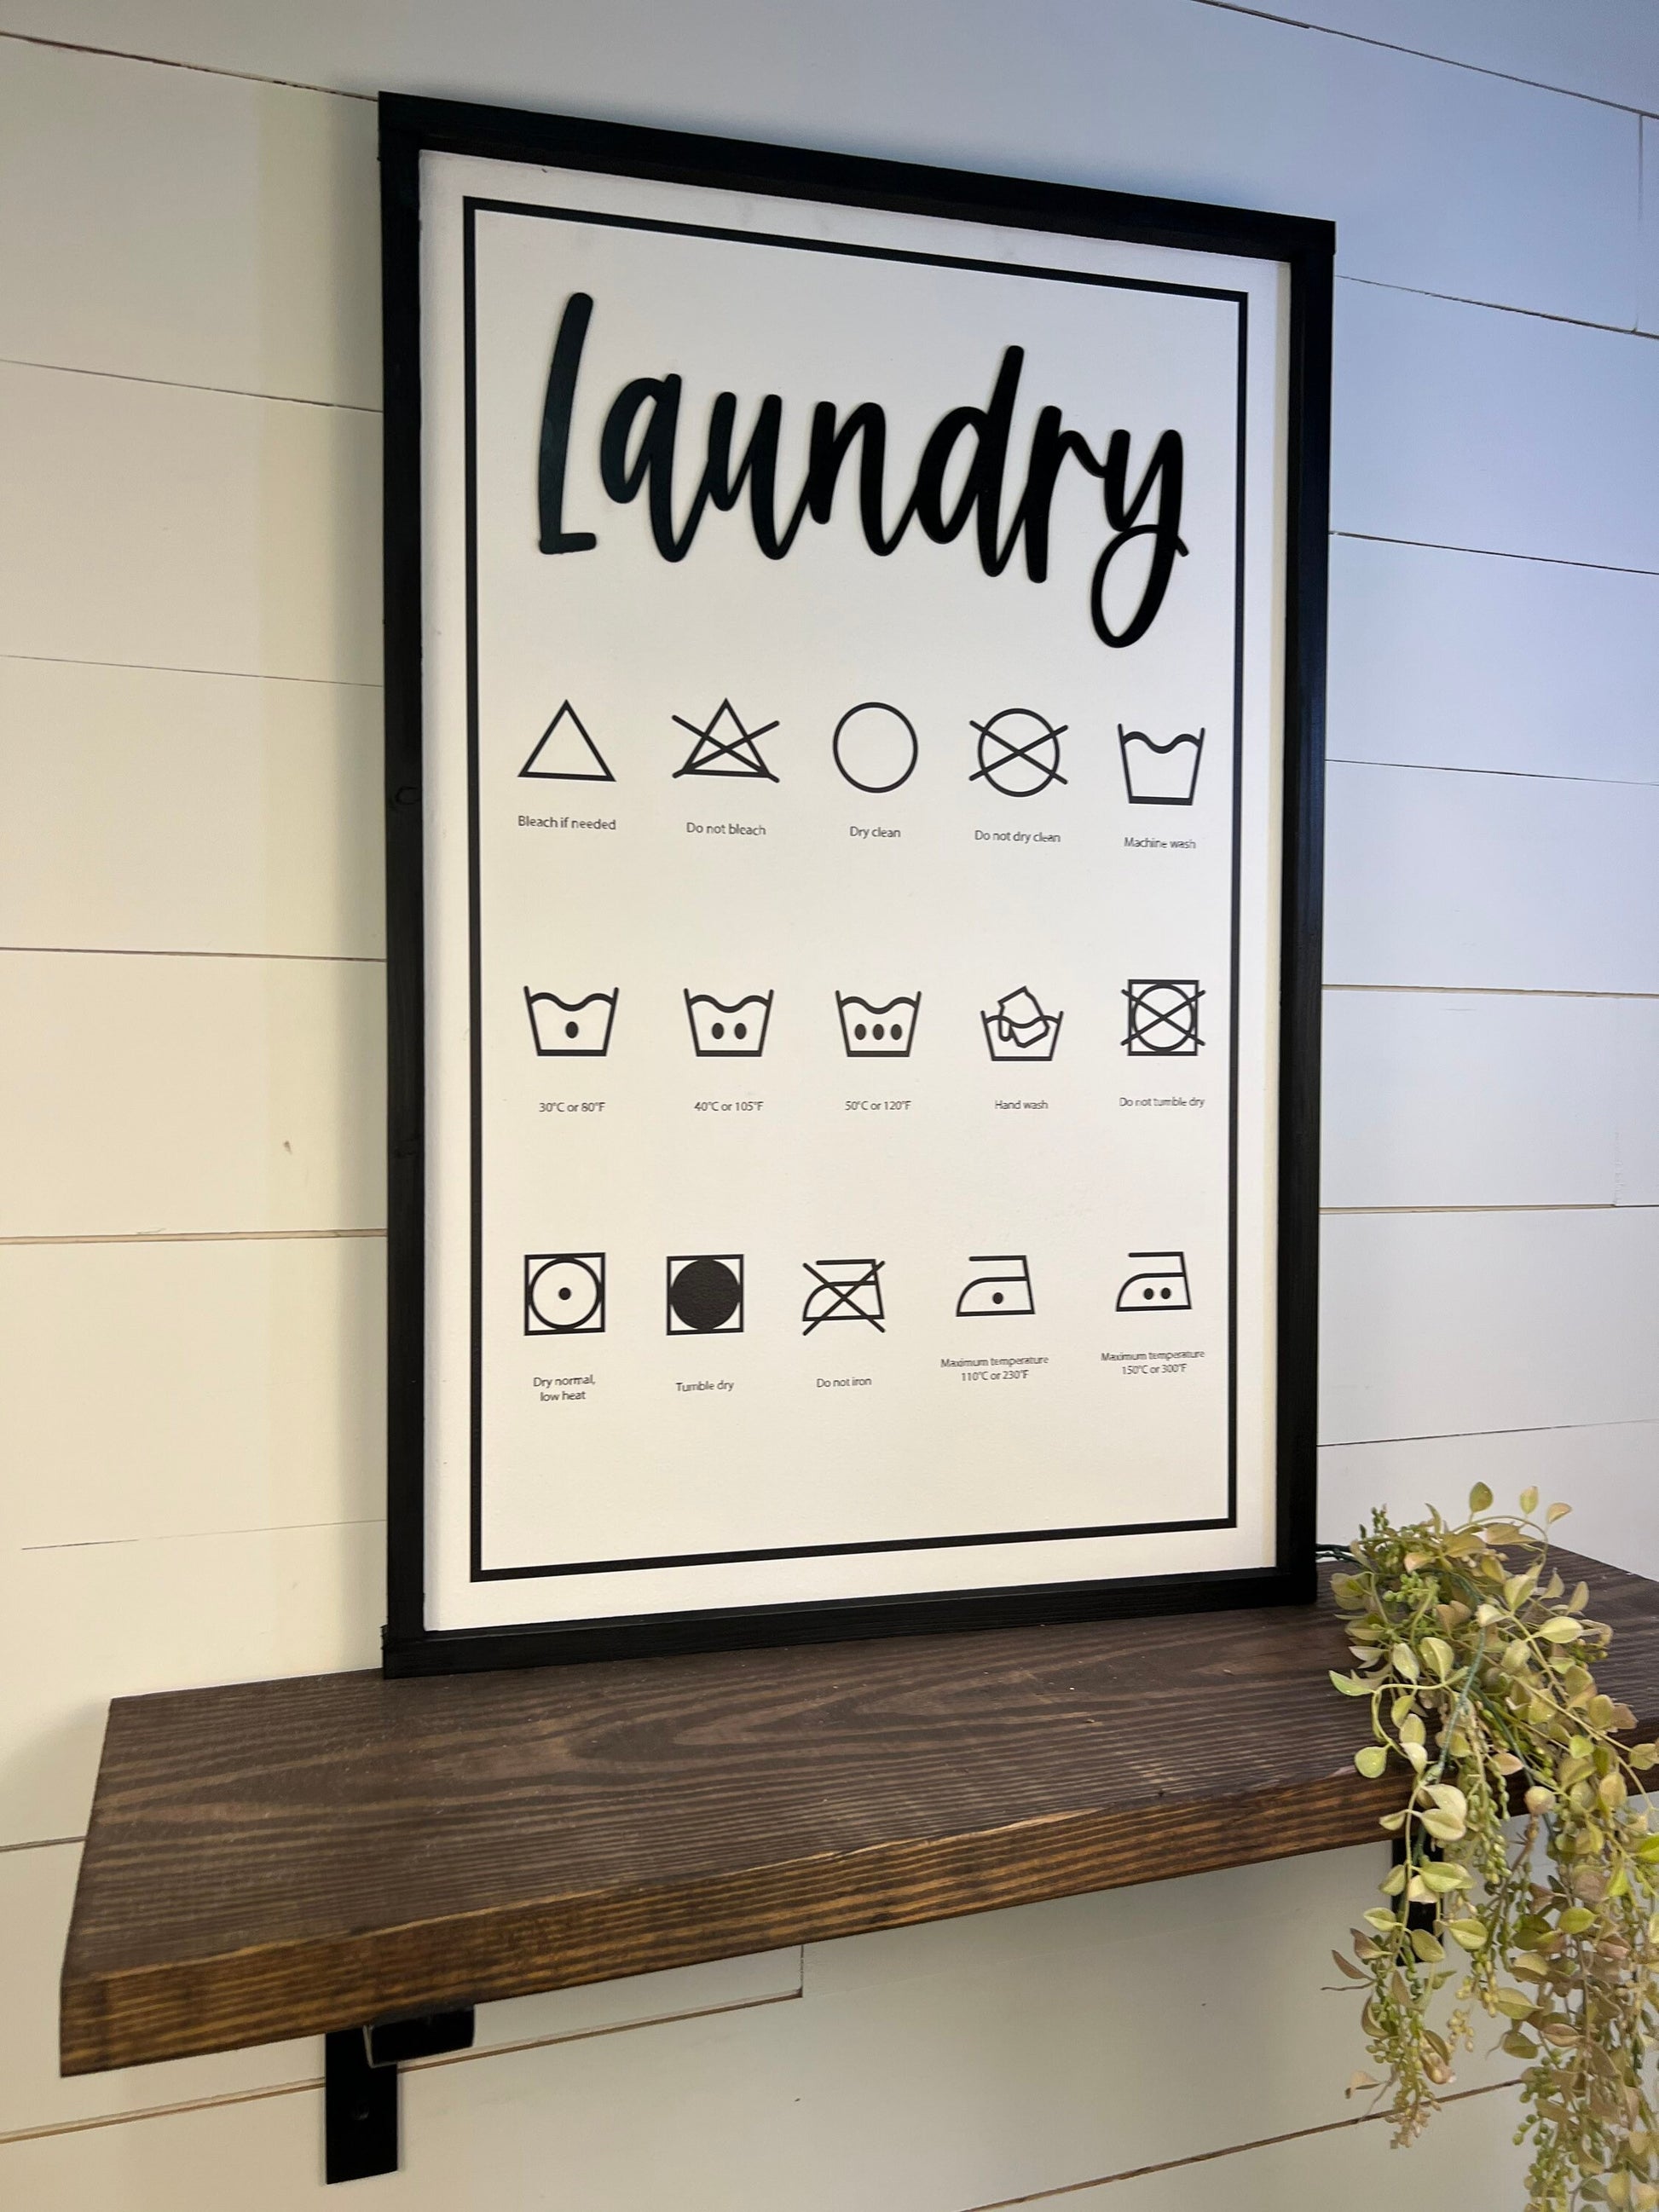 laundry decoded [FREE SHIPPING!]